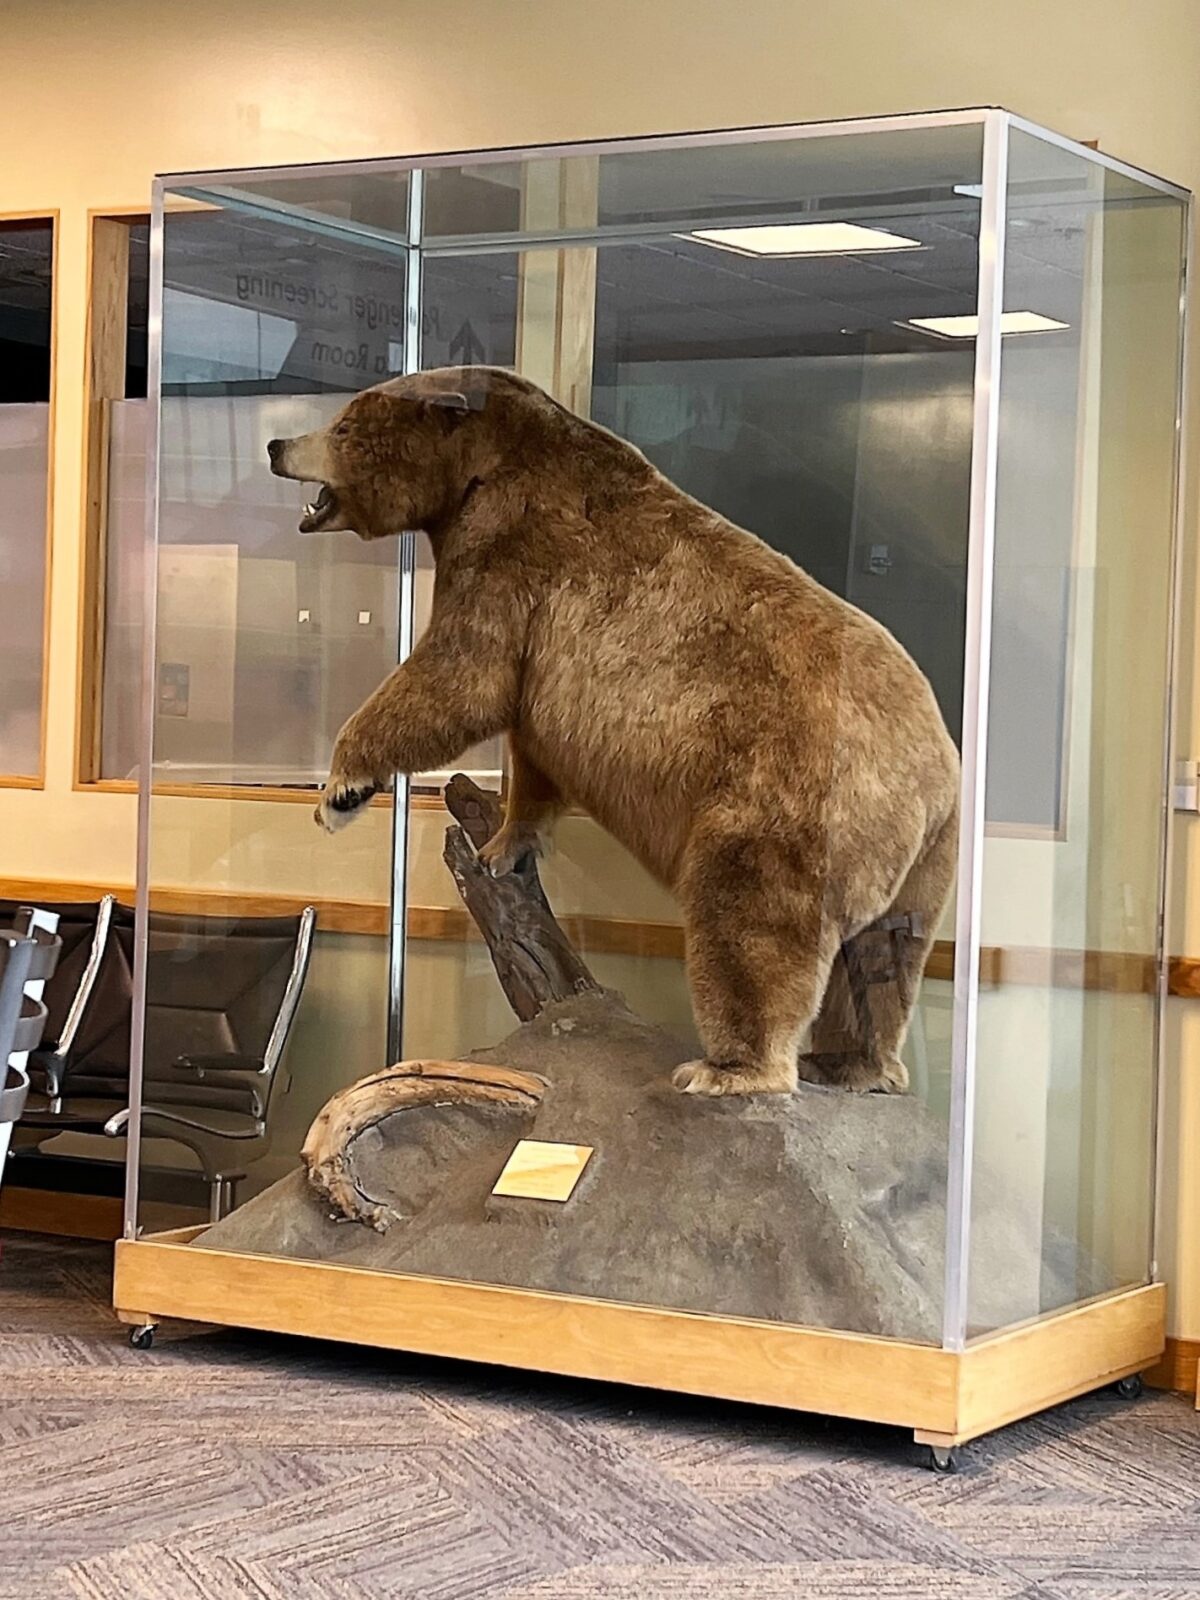 Wildlife spotted at Juneau International Airport